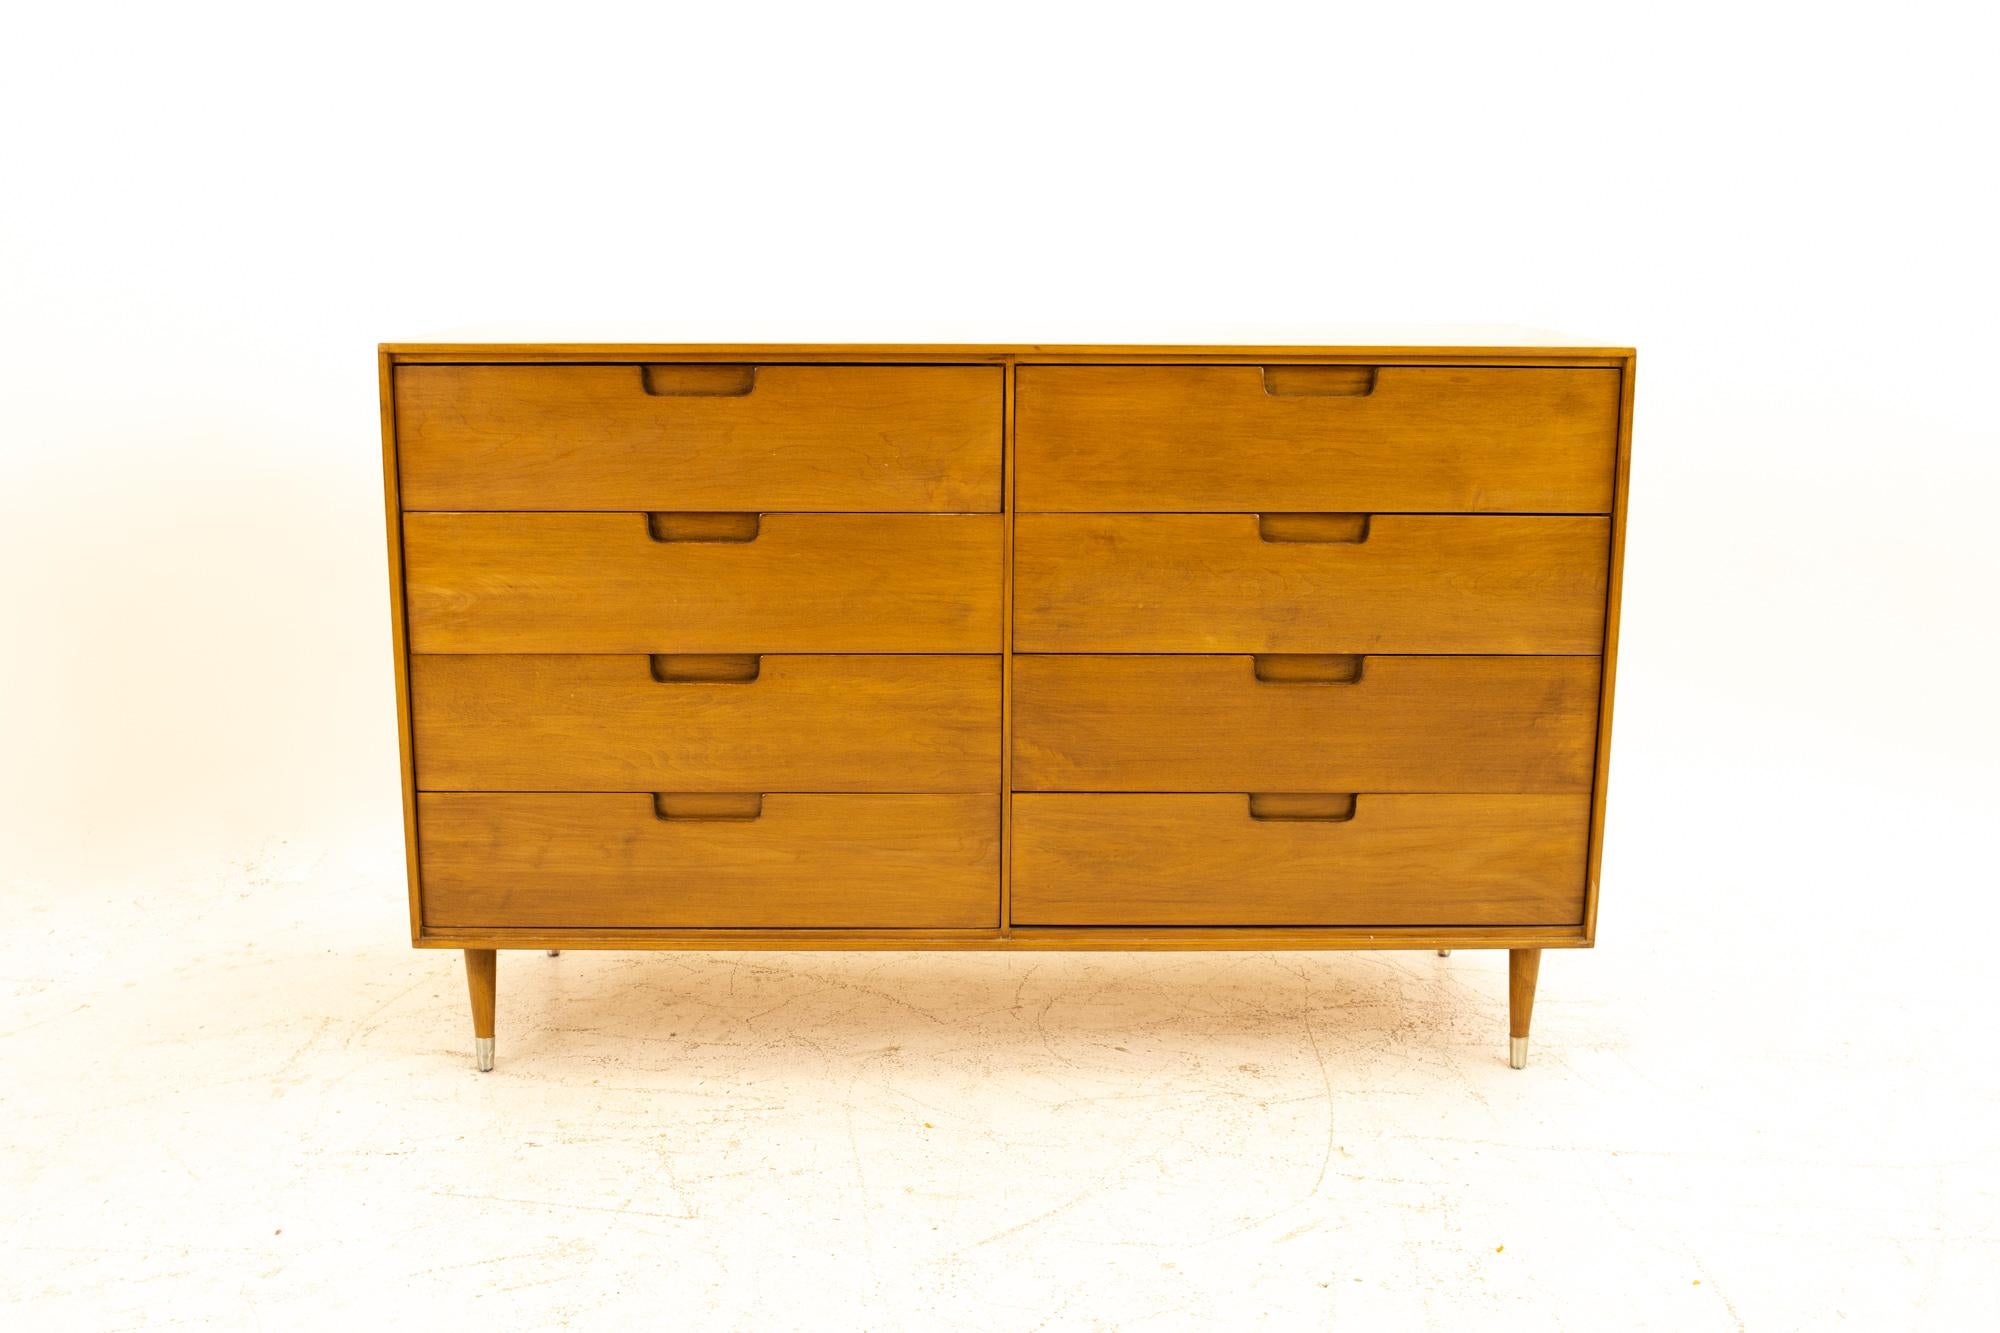 Milo Baughman style Mid Century 8-drawer blonde dresser
Dresser measures: 48 wide x 18 deep x 30 inches high

All pieces of furniture can be had in what we call restored vintage condition. That means the piece is restored upon purchase so it’s free